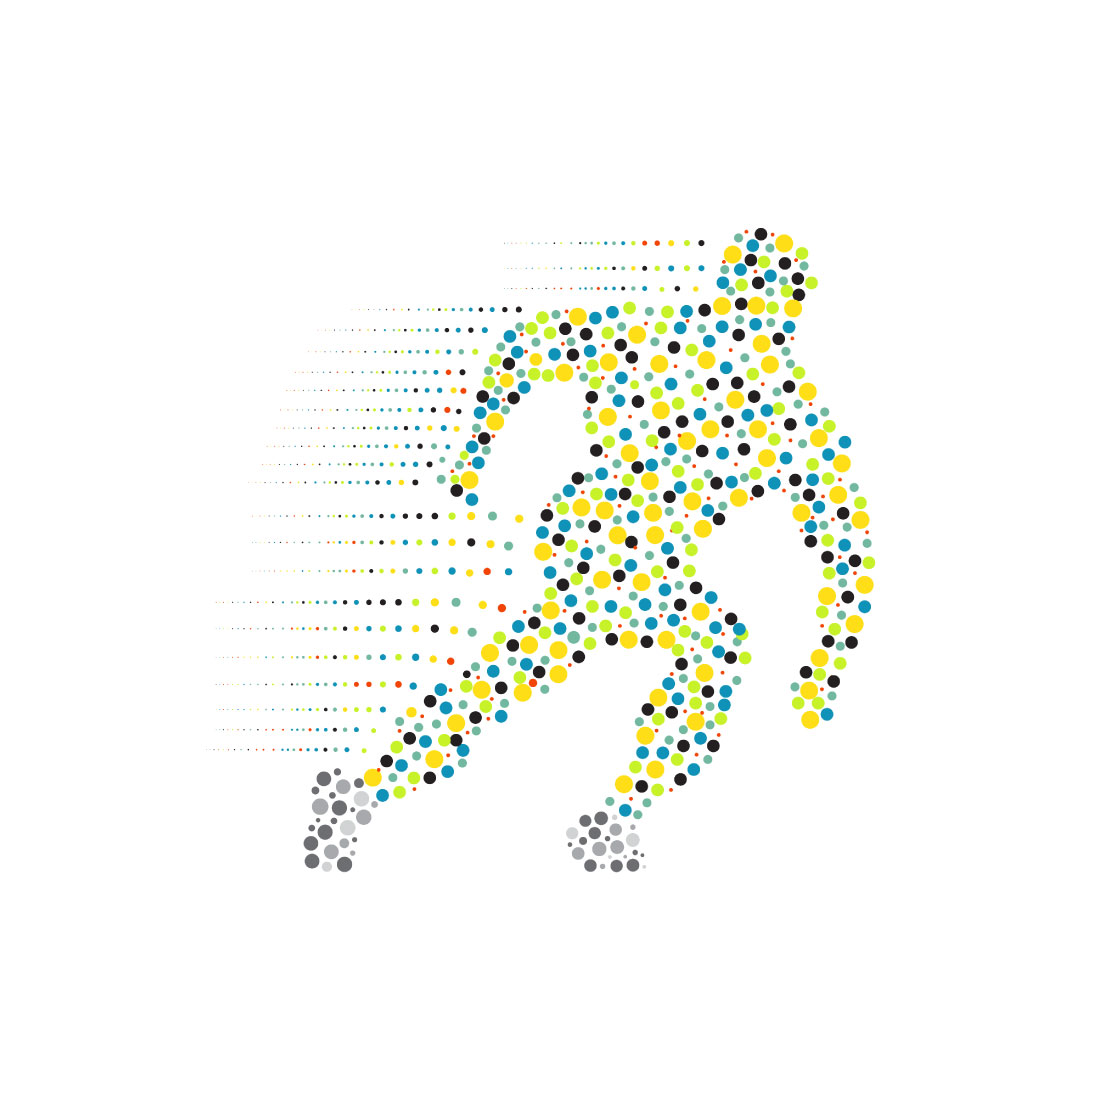 Speedy person composed of colored dots, vector illustration cover image.